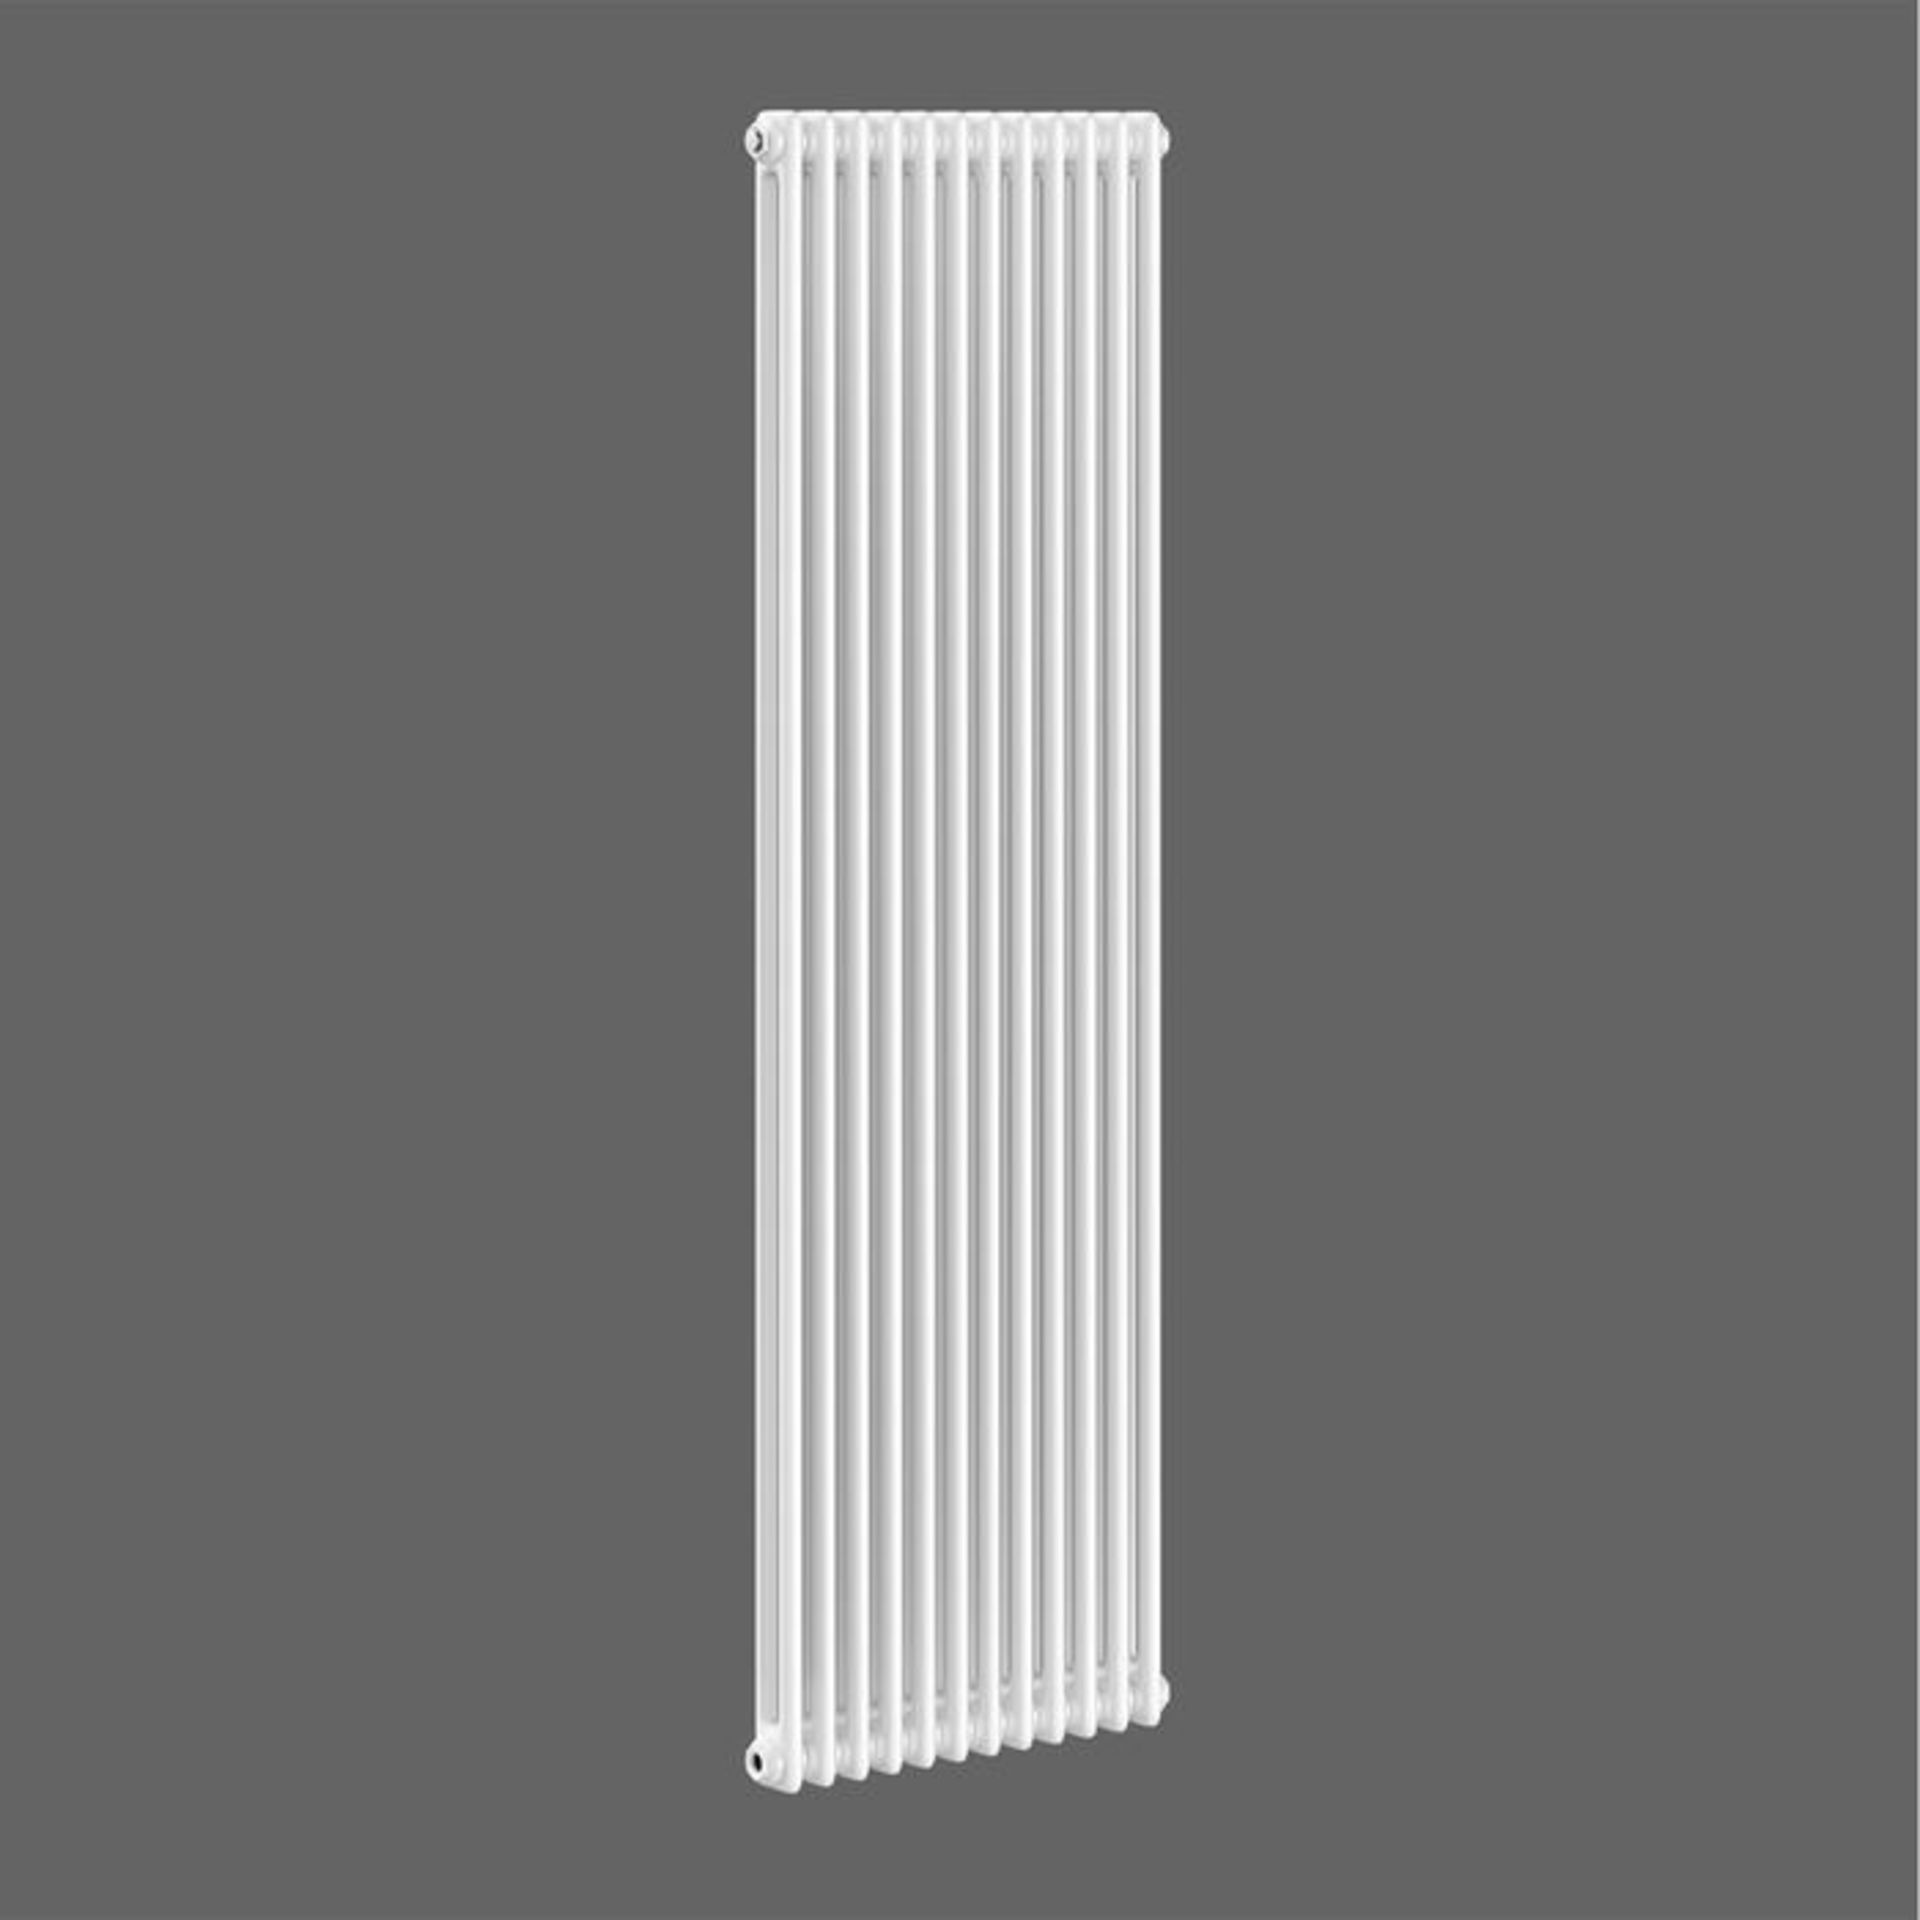 (CC127) 2000x490mm White Double Panel Vertical Colosseum Traditional Radiator. RRP £419.99. ... - Image 3 of 3